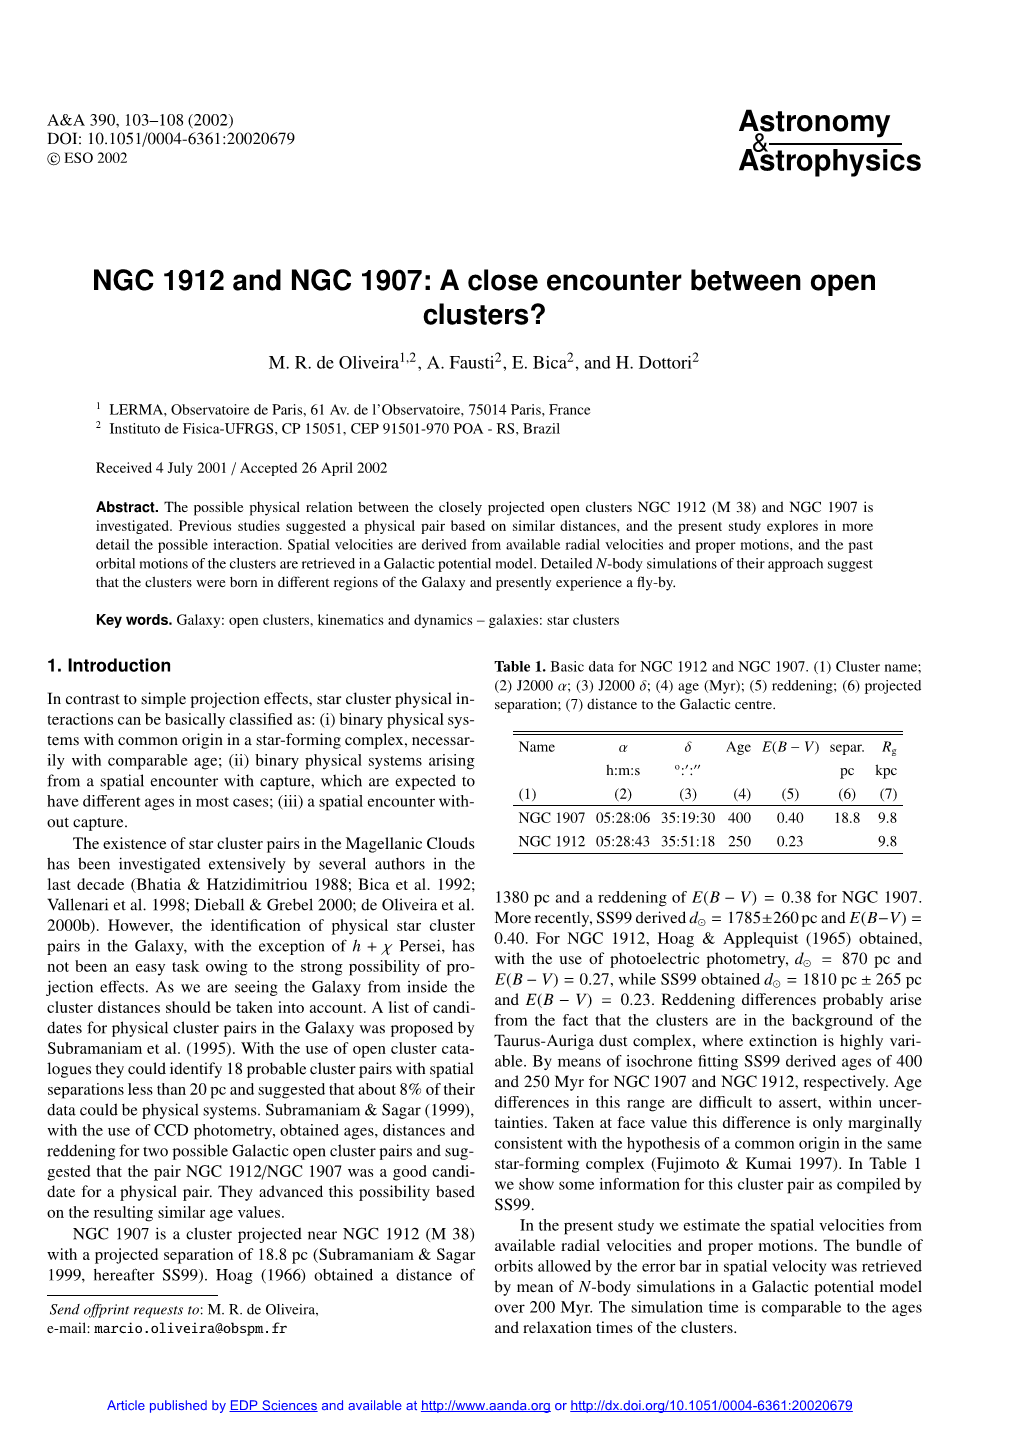 NGC 1912 and NGC 1907: a Close Encounter Between Open Clusters?